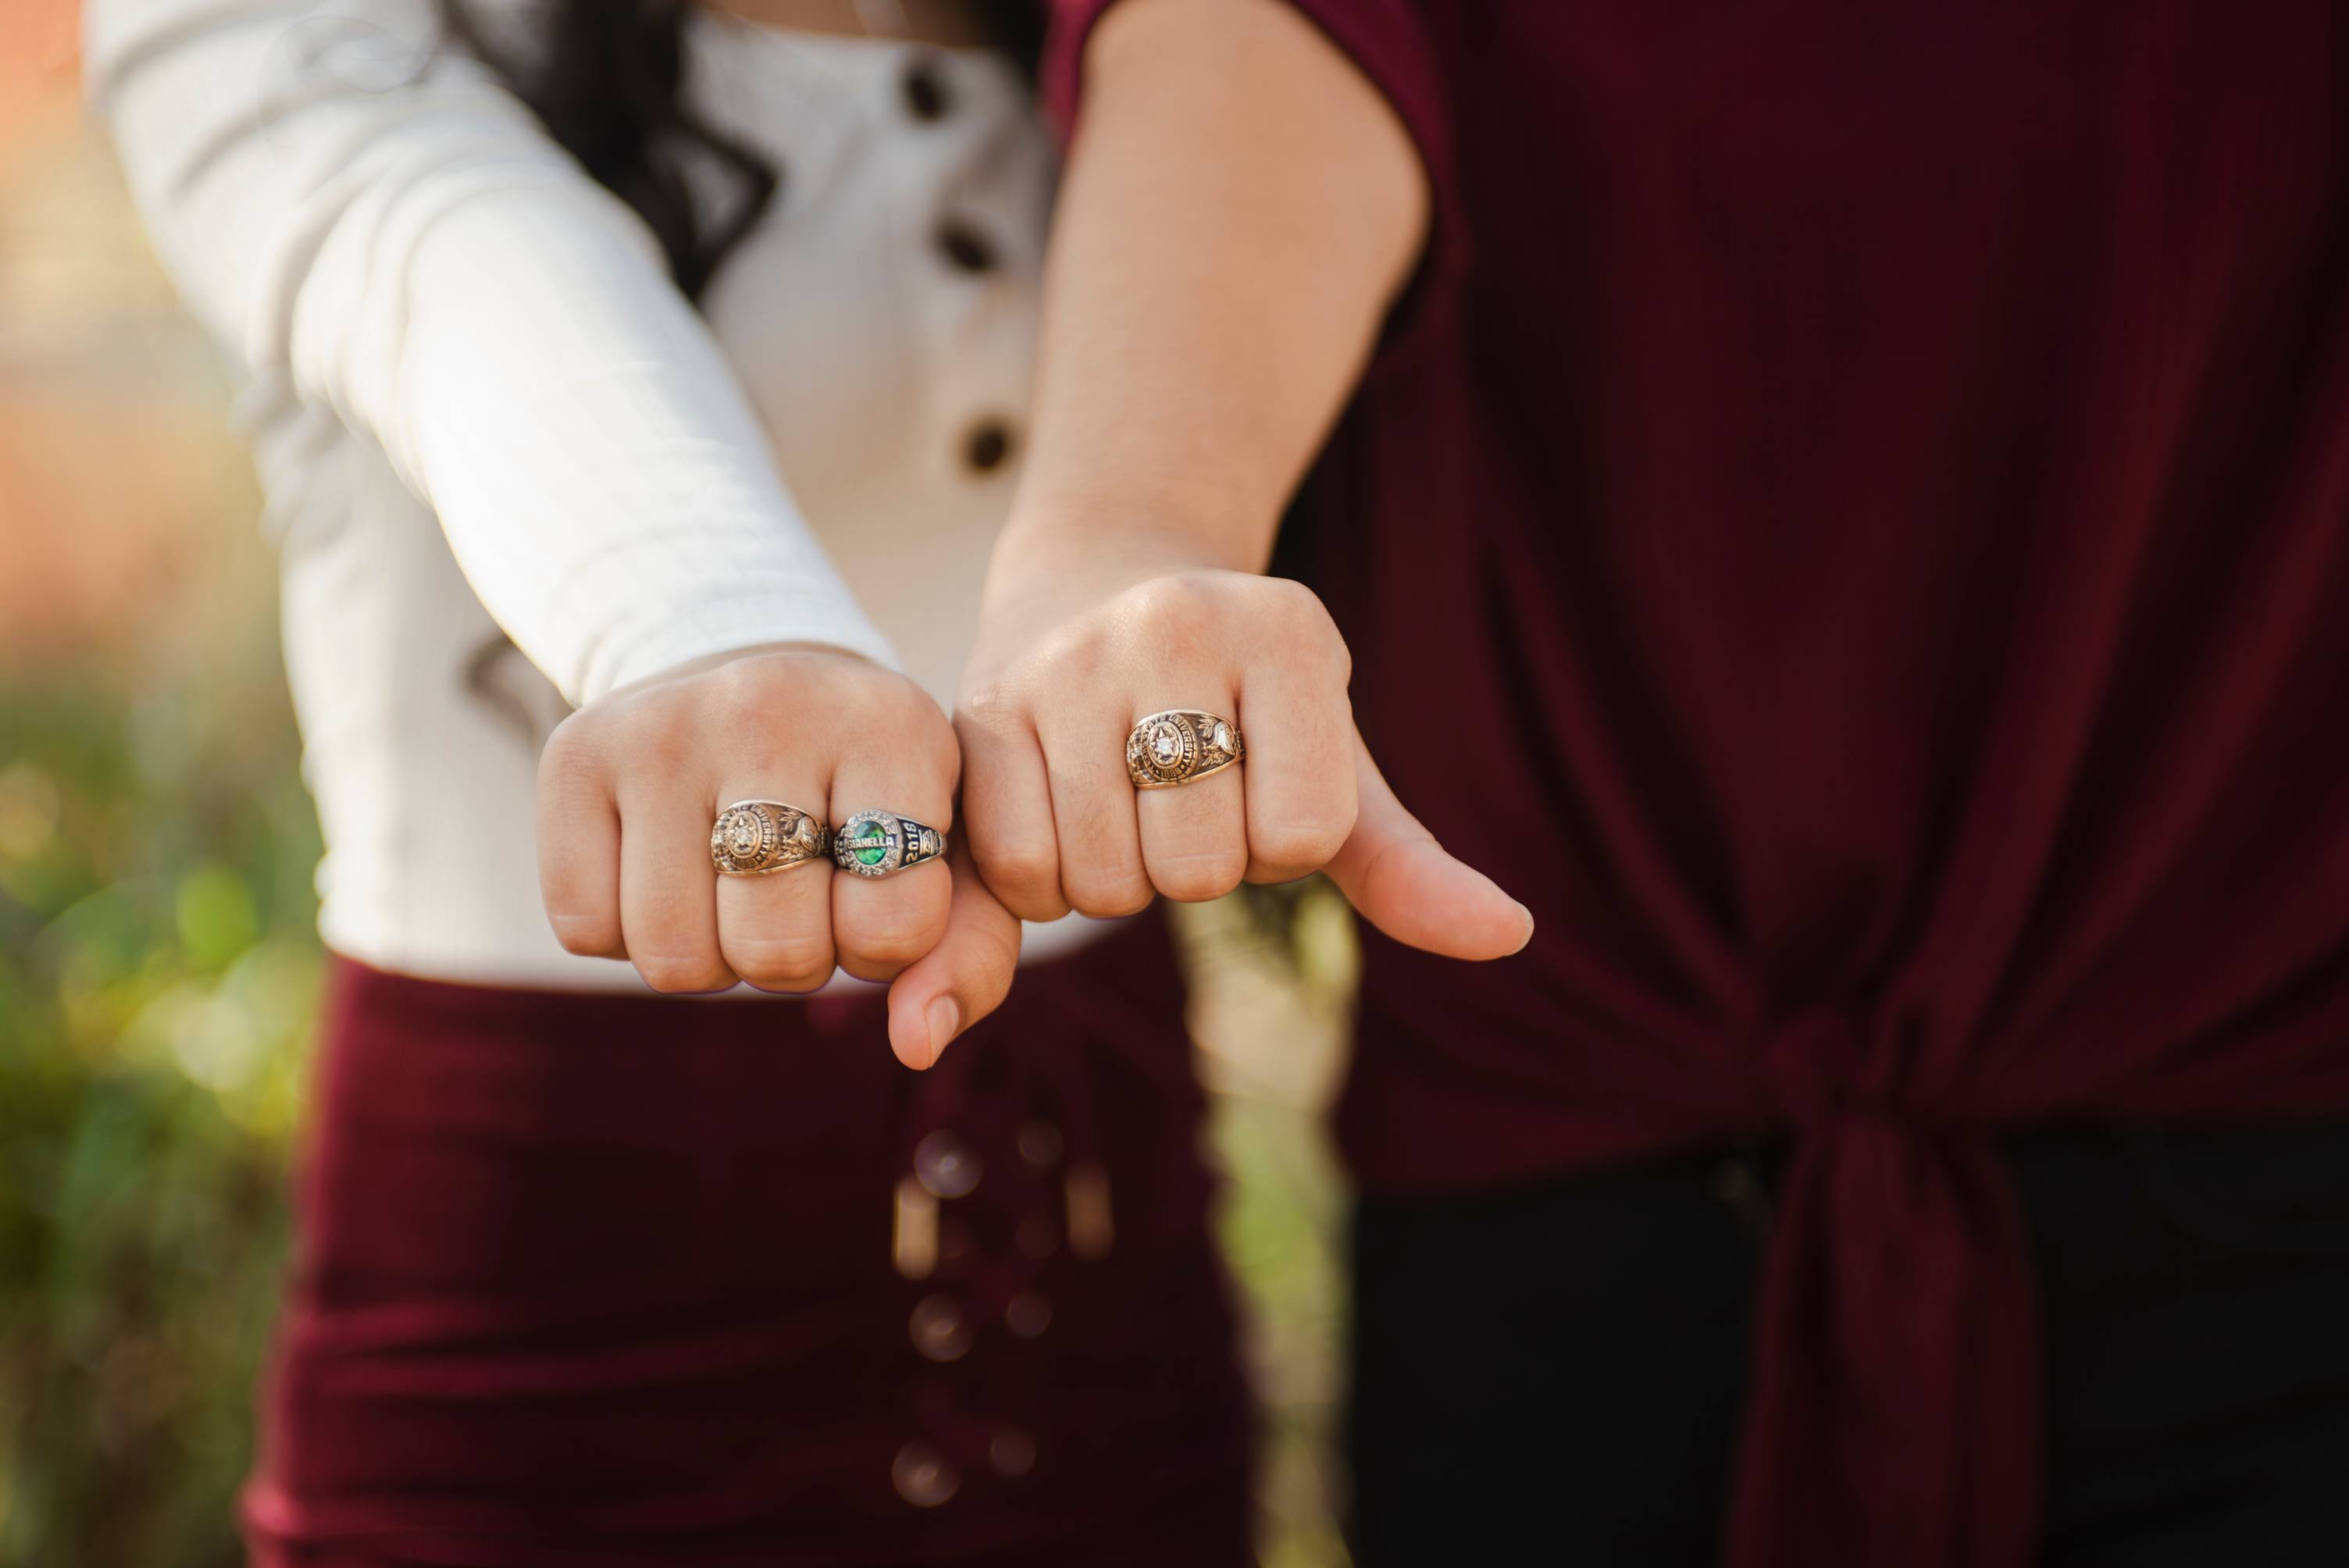 Double Ring Ceremonies | My Jewish Learning